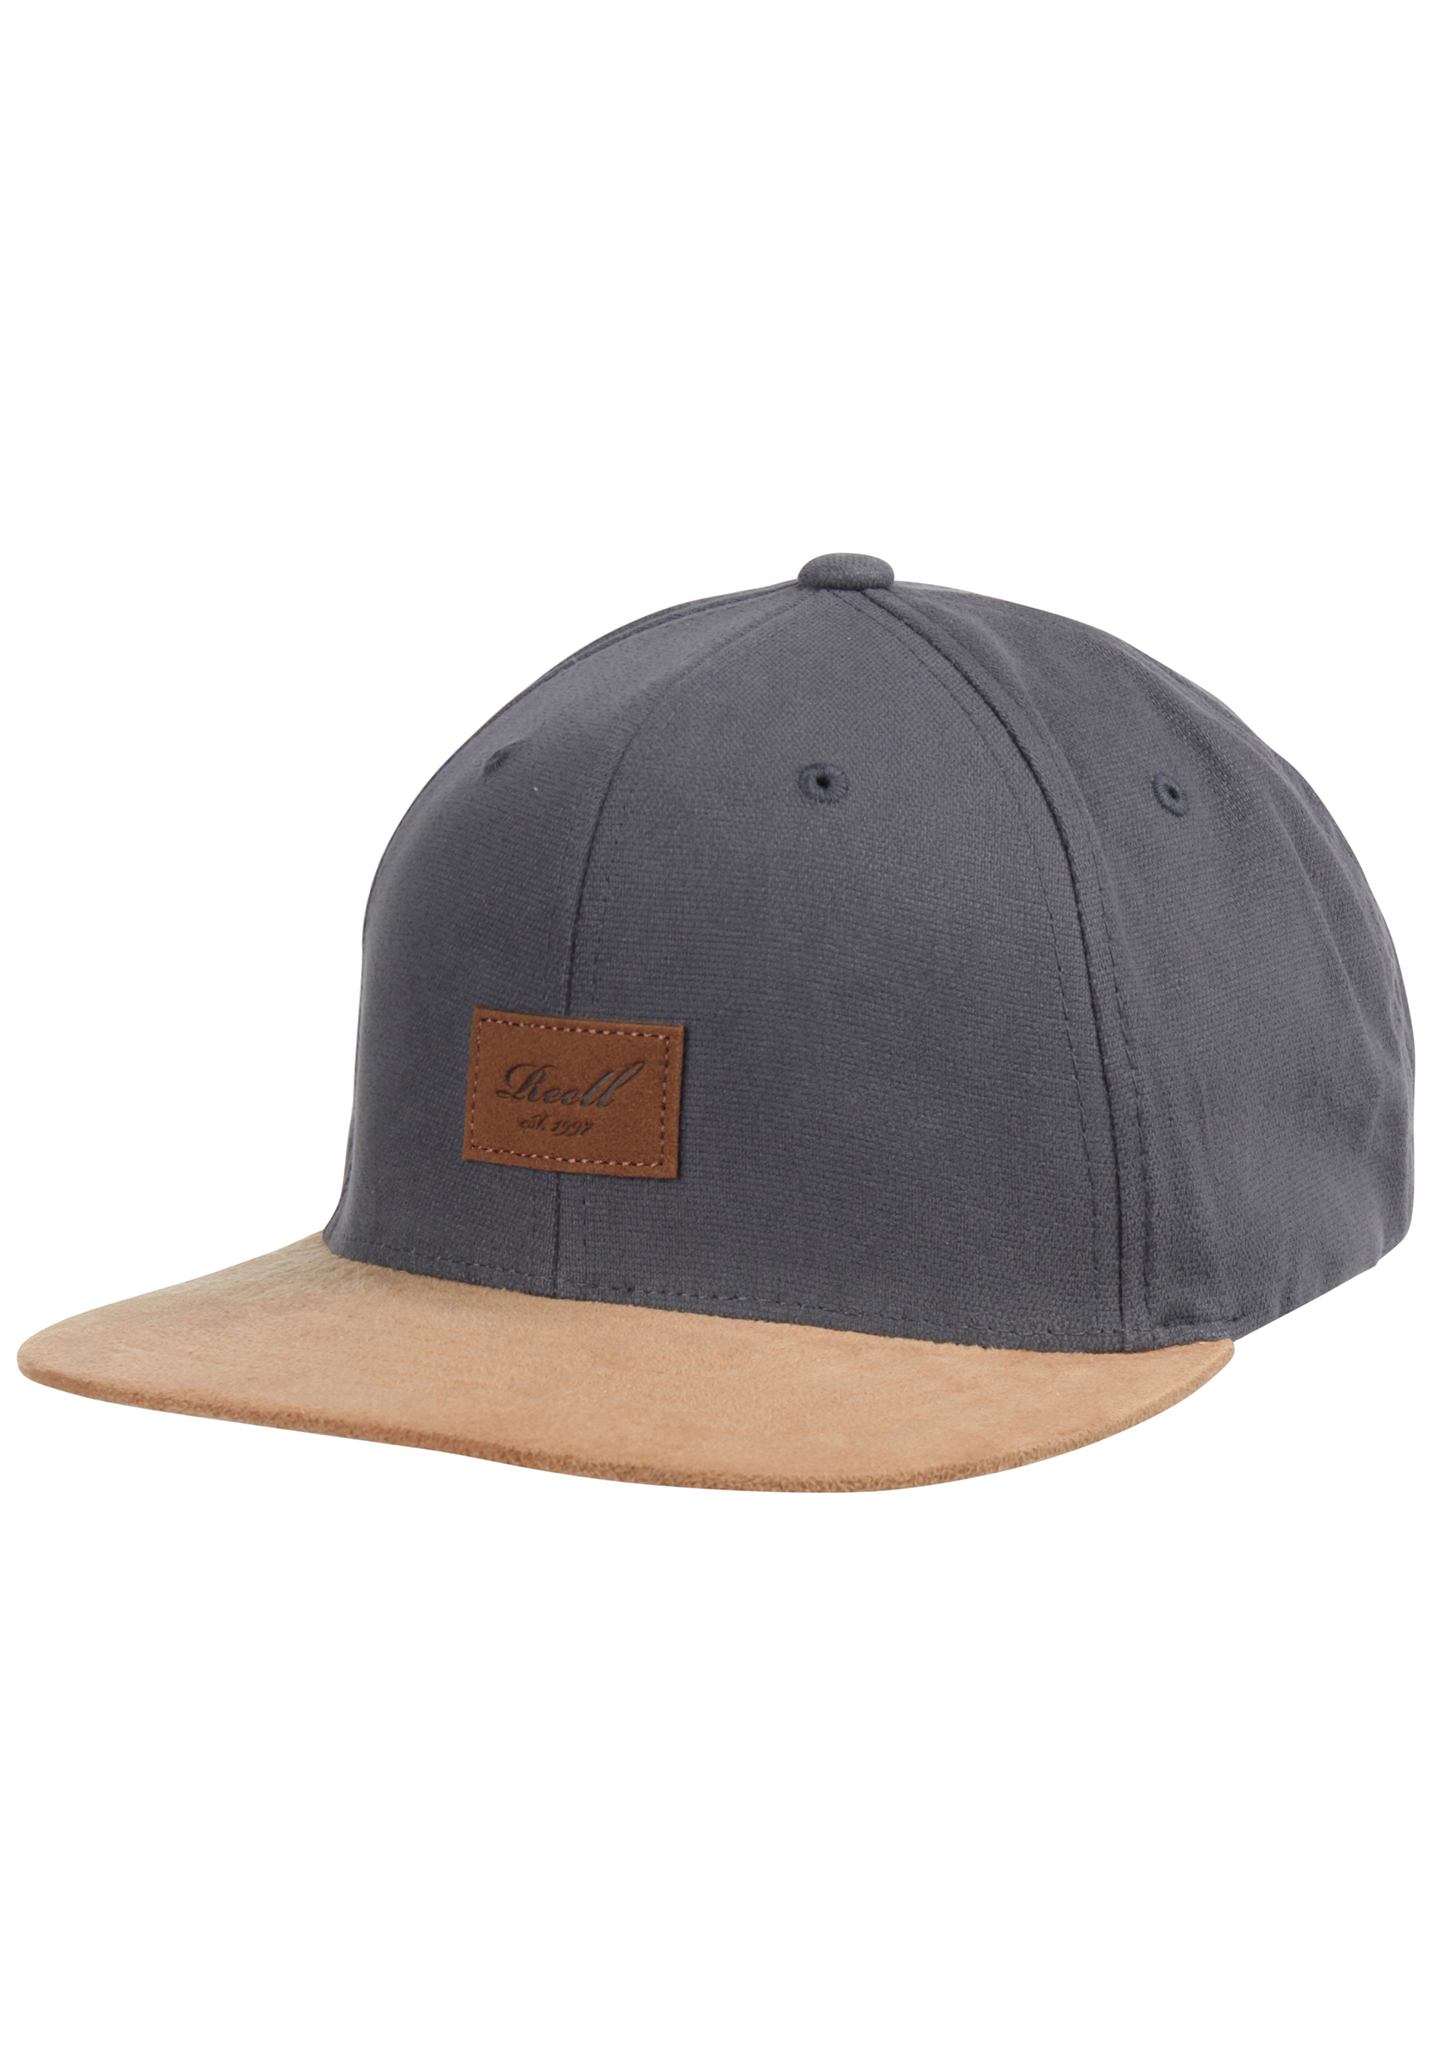 Reell Suede Snapback Cap charcoal One Size